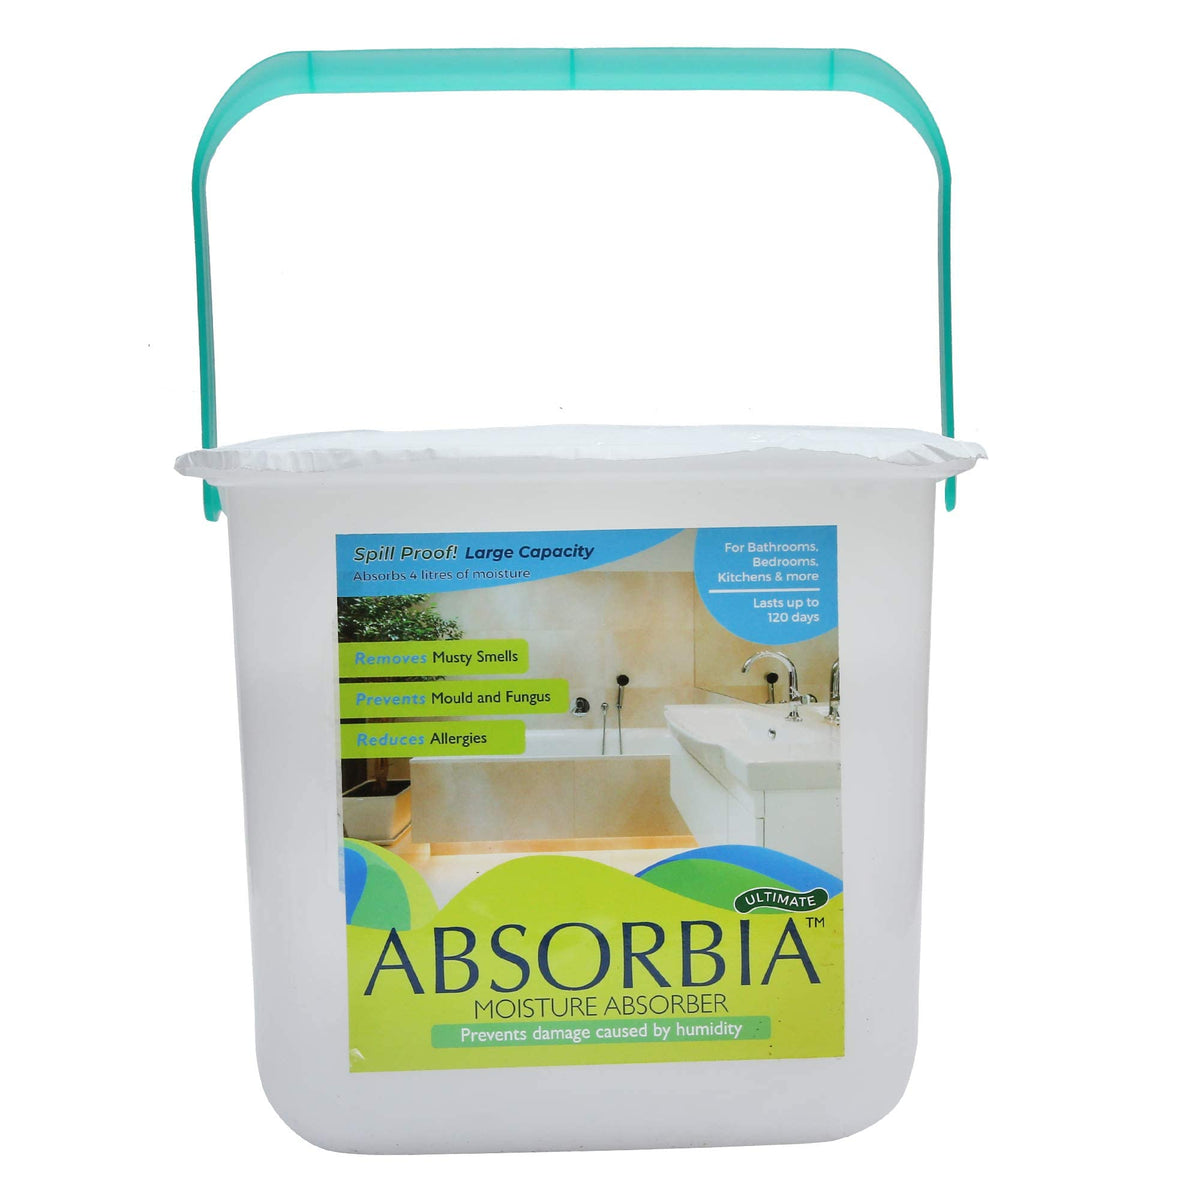 Absorbia Moisture Absorber | Absorbia Ultimate (4L) | Pack of 24 Non-Electric Dehumidier for Large Areas, Bedrooms, Living Room Dining Room| Fights Against Moisture, Mould, Fungus Musty smells…